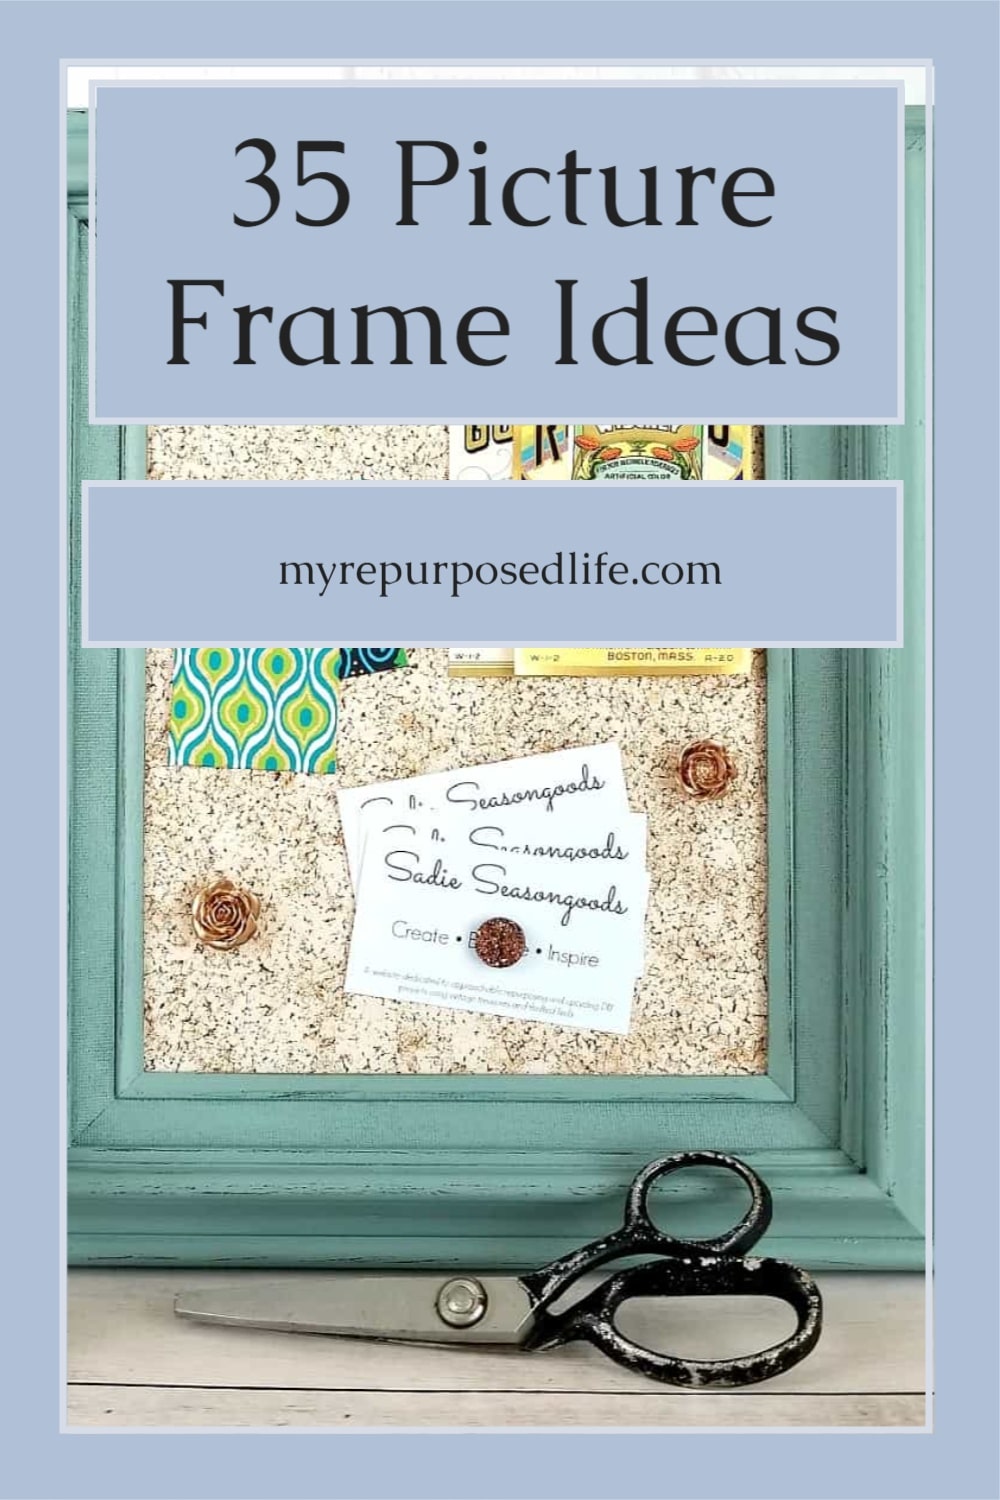 This roundup of picture frame ideas will give you lots of inspiration and ways to repurpose those thrift store picture frames you have hanging around. #MyRepurposedLife #repurposed #picture #frames via @repurposedlife